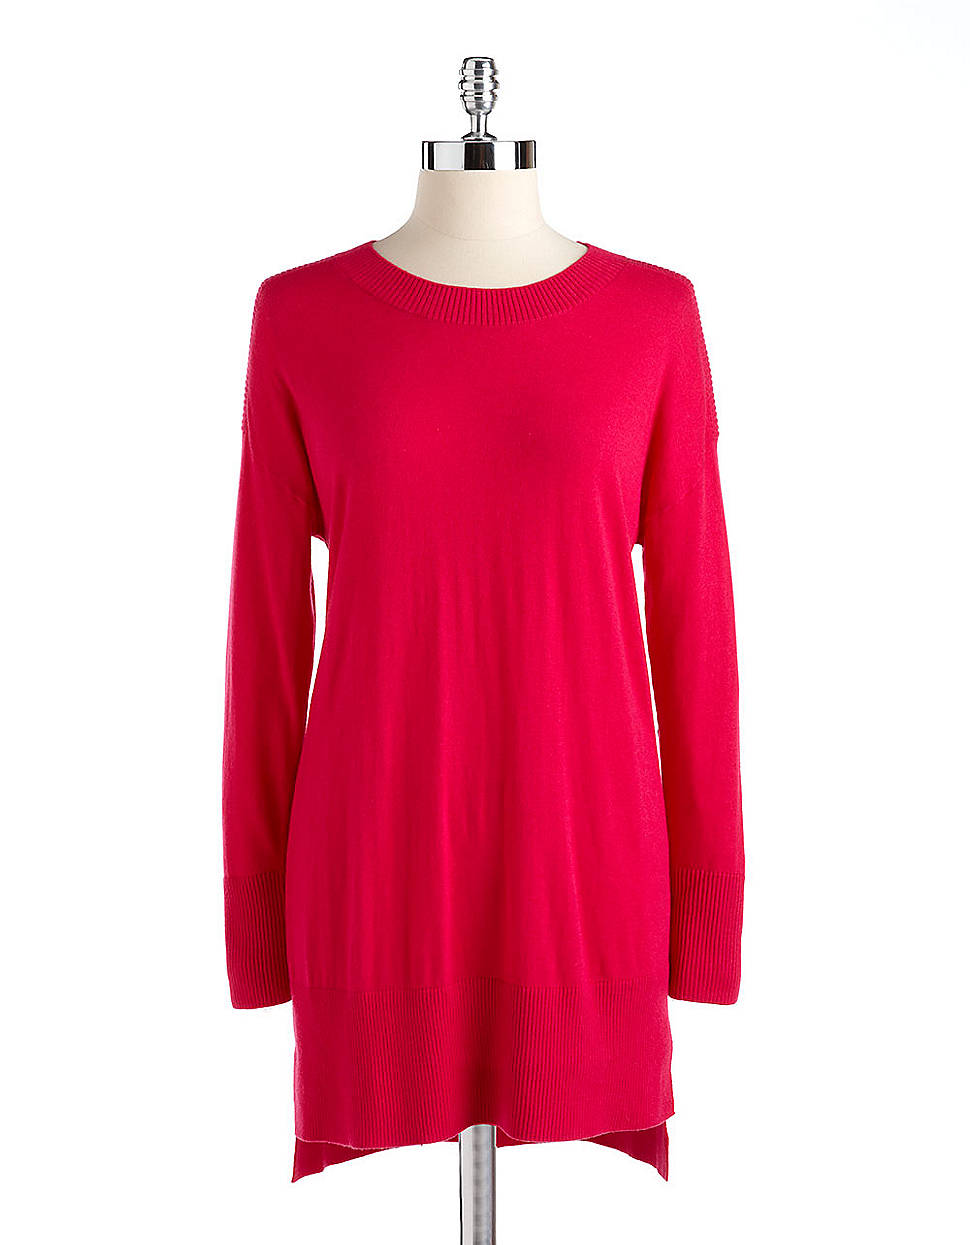 Dkny Sabrina Neck Sweater Tunic in Red (Poppy) | Lyst